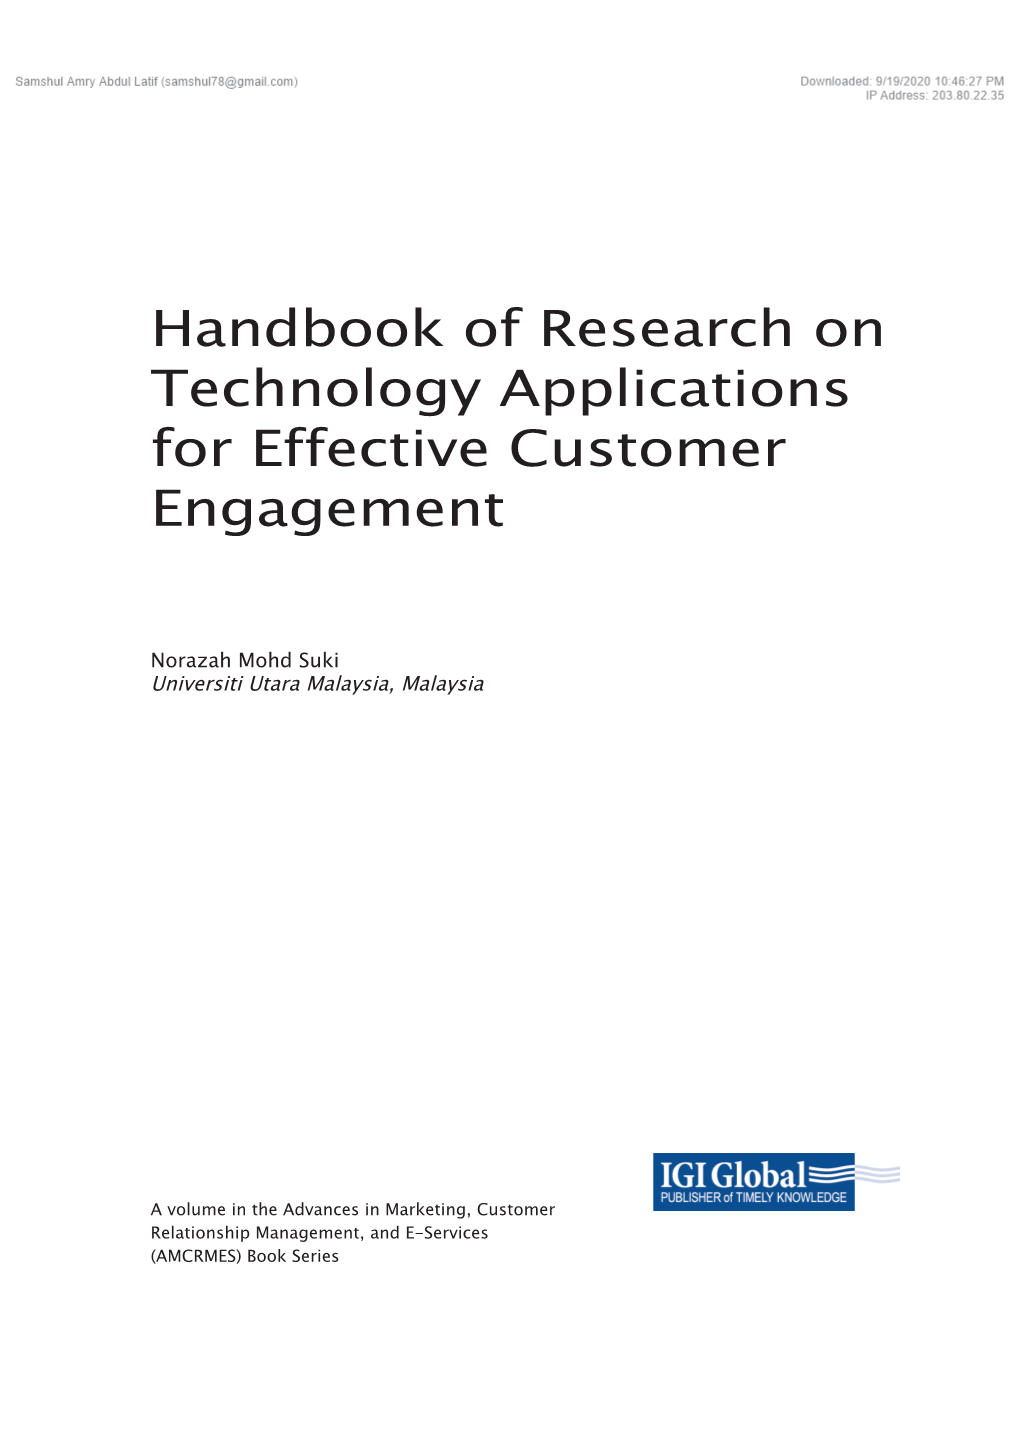 Handbook of Research on Technology Applications for Effective Customer Engagement / Norazah Mohd Suki, Editor